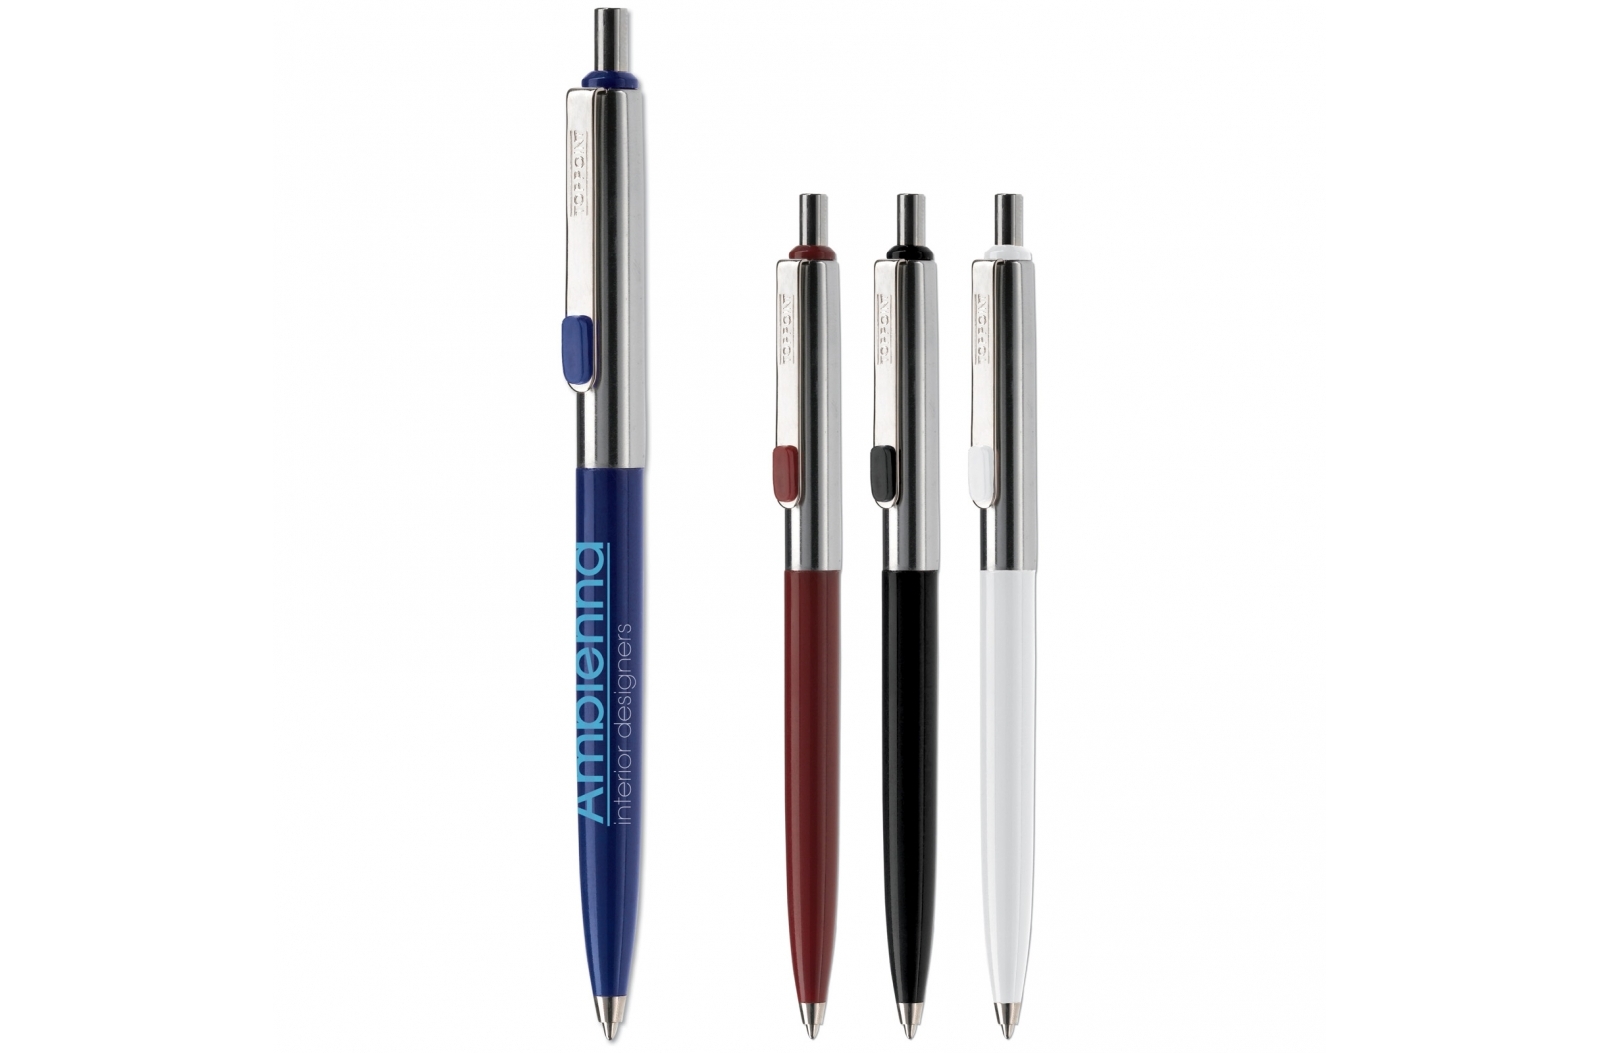 Pen with Chromed Metal Ball Parts - Tisbury